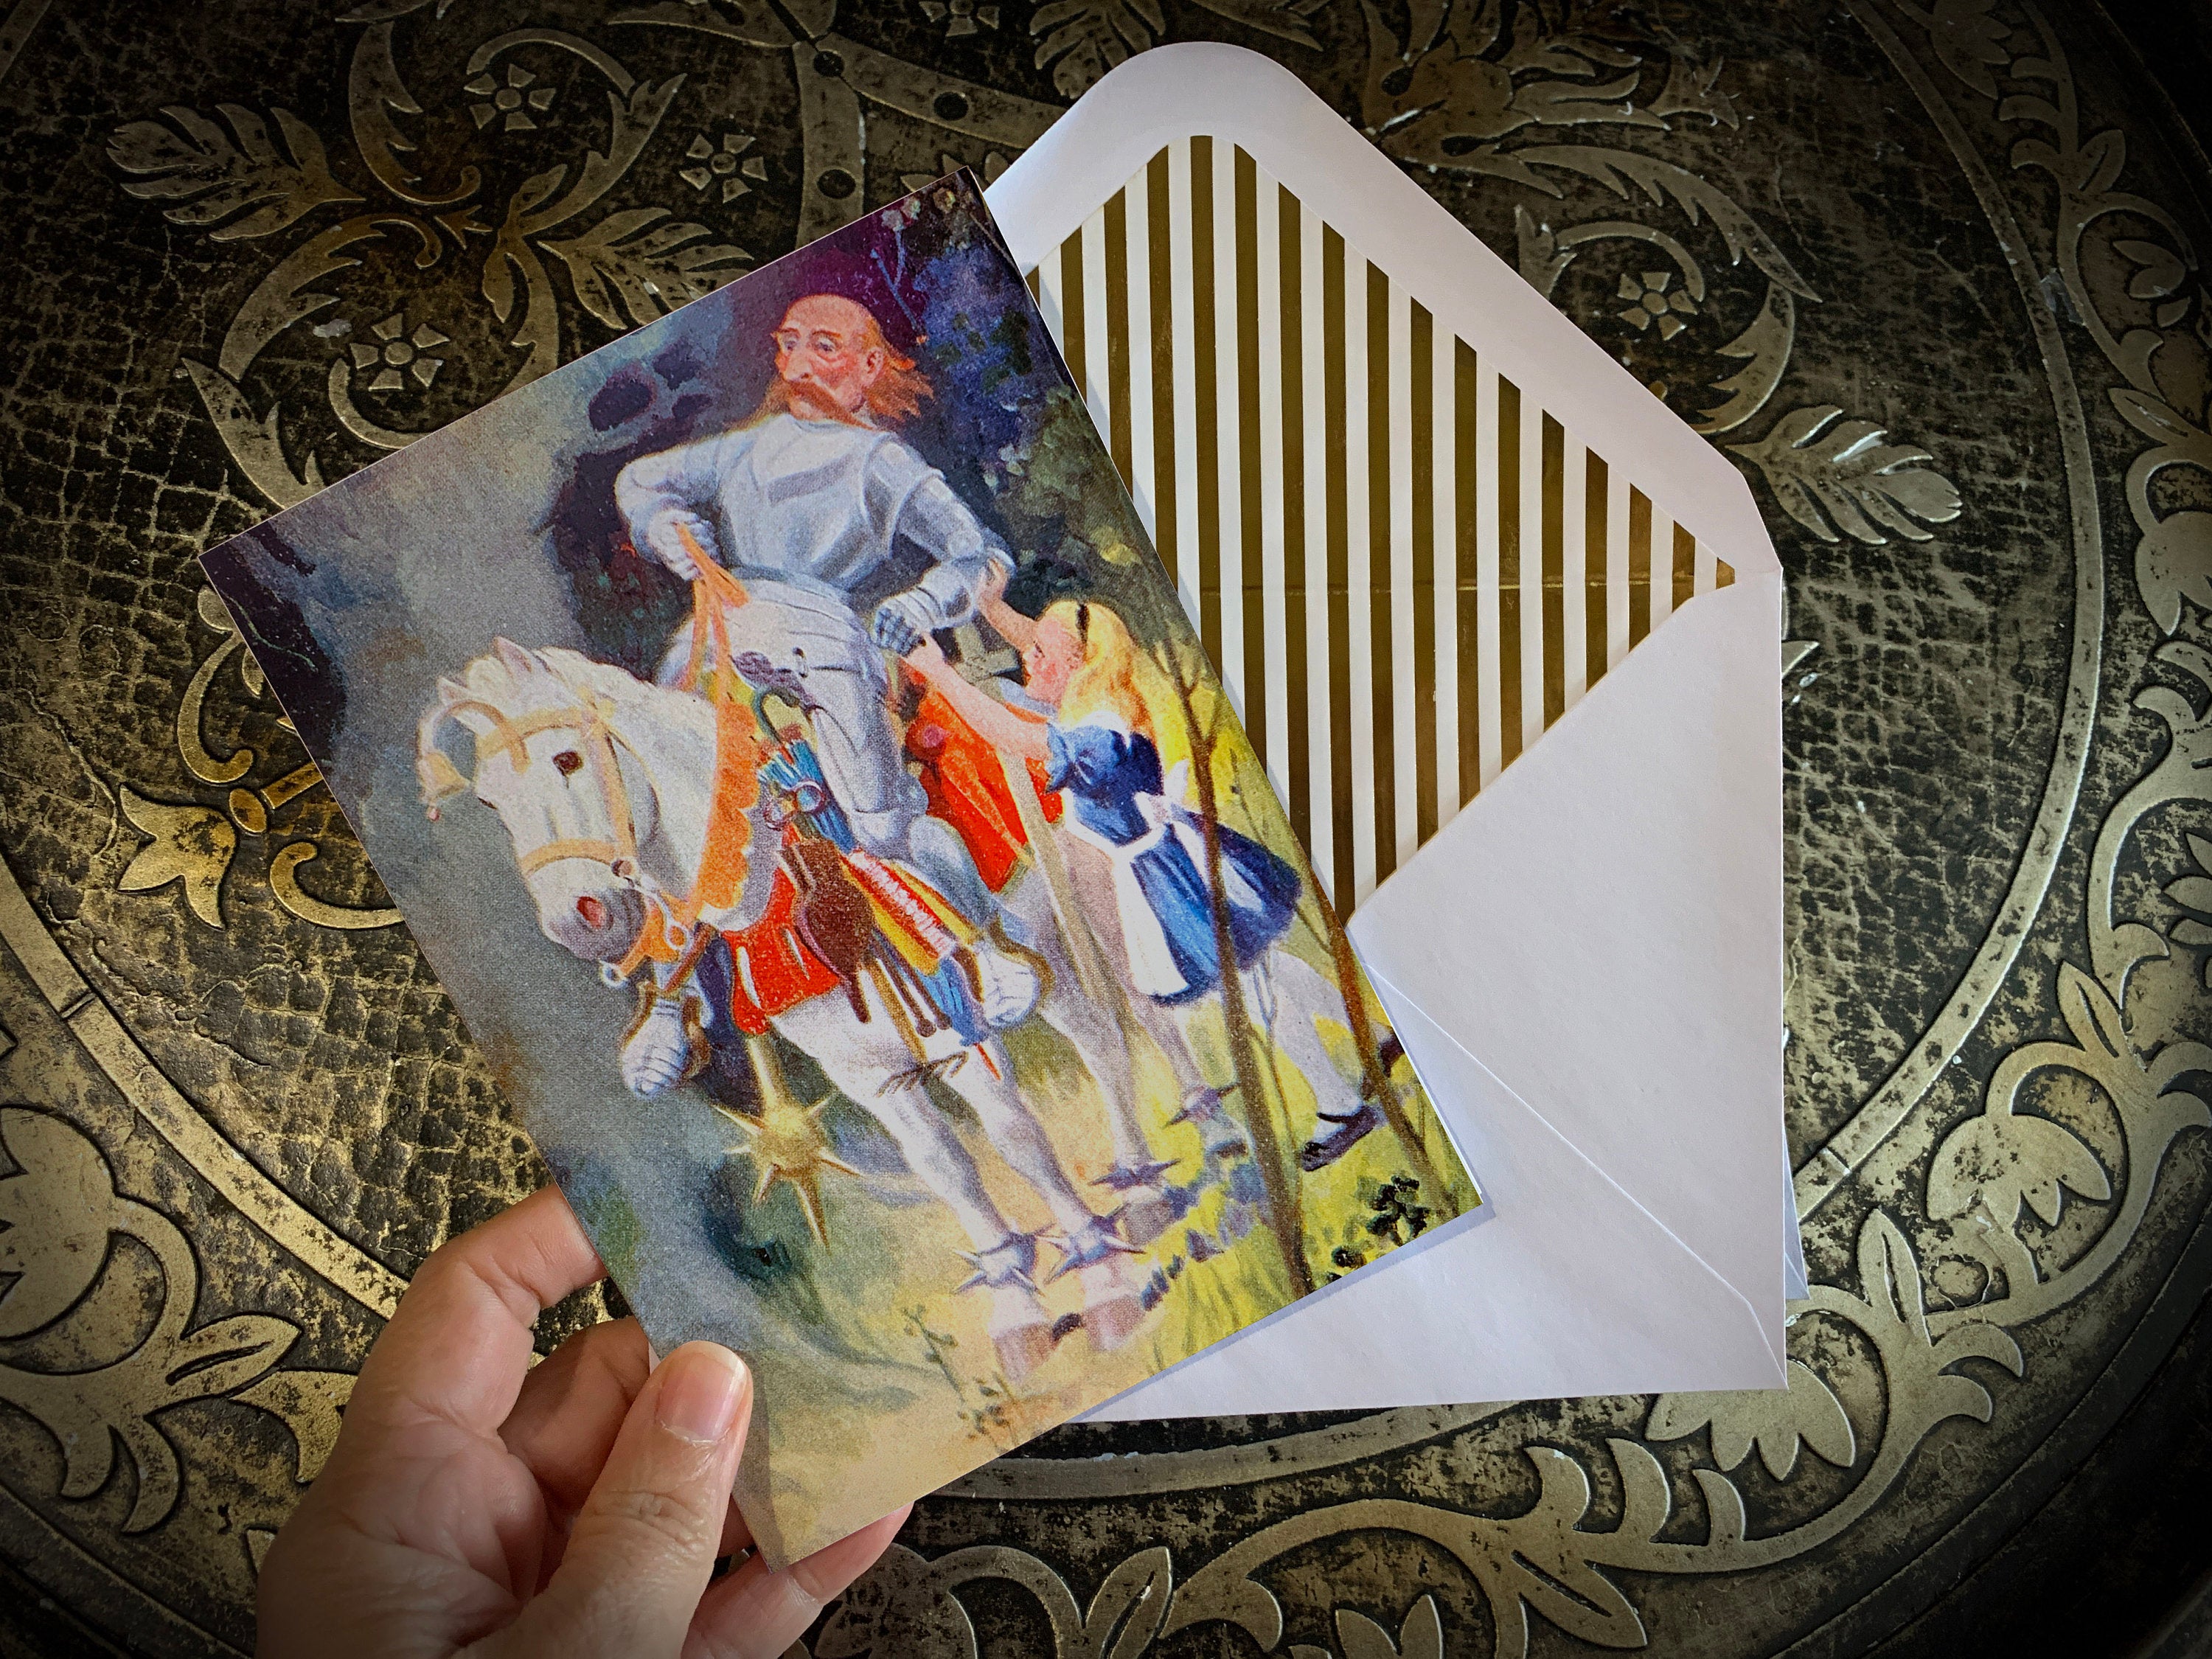 Alice and the White Knight, Alice in Wonderland Greeting Card with Elegant Striped Gold Foil Envelope, 1 Card/Envelope